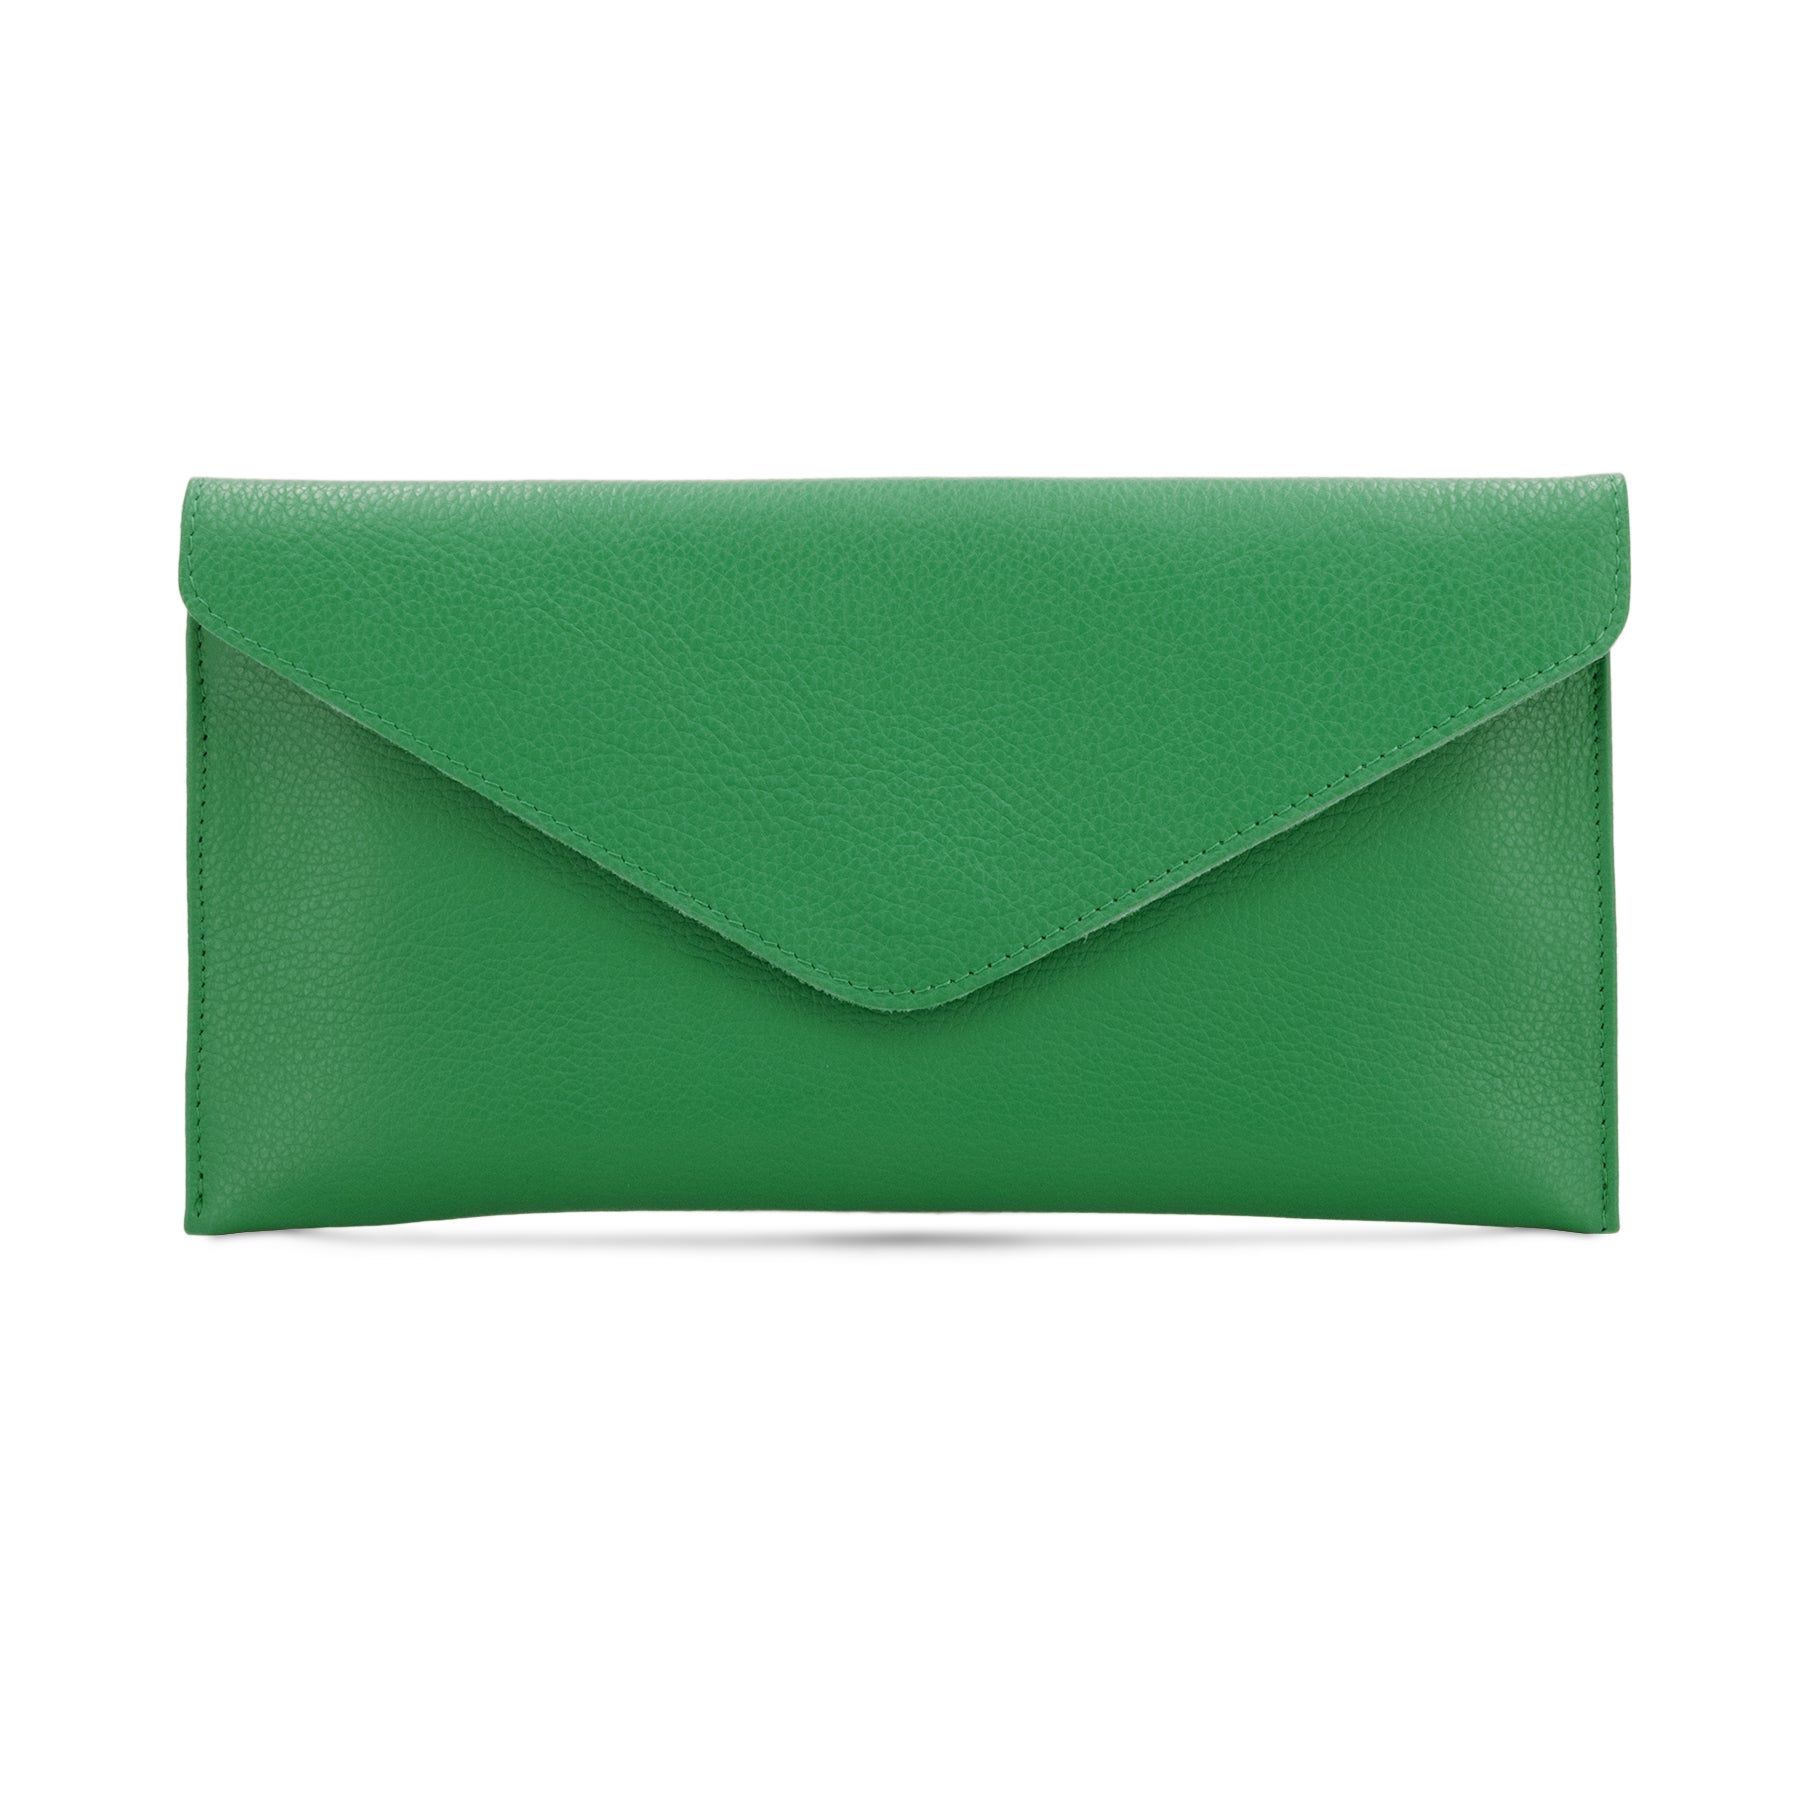 luscious scarves Green Genuine Italian Leather Envelope Clutch Bag , 10 Colours Available